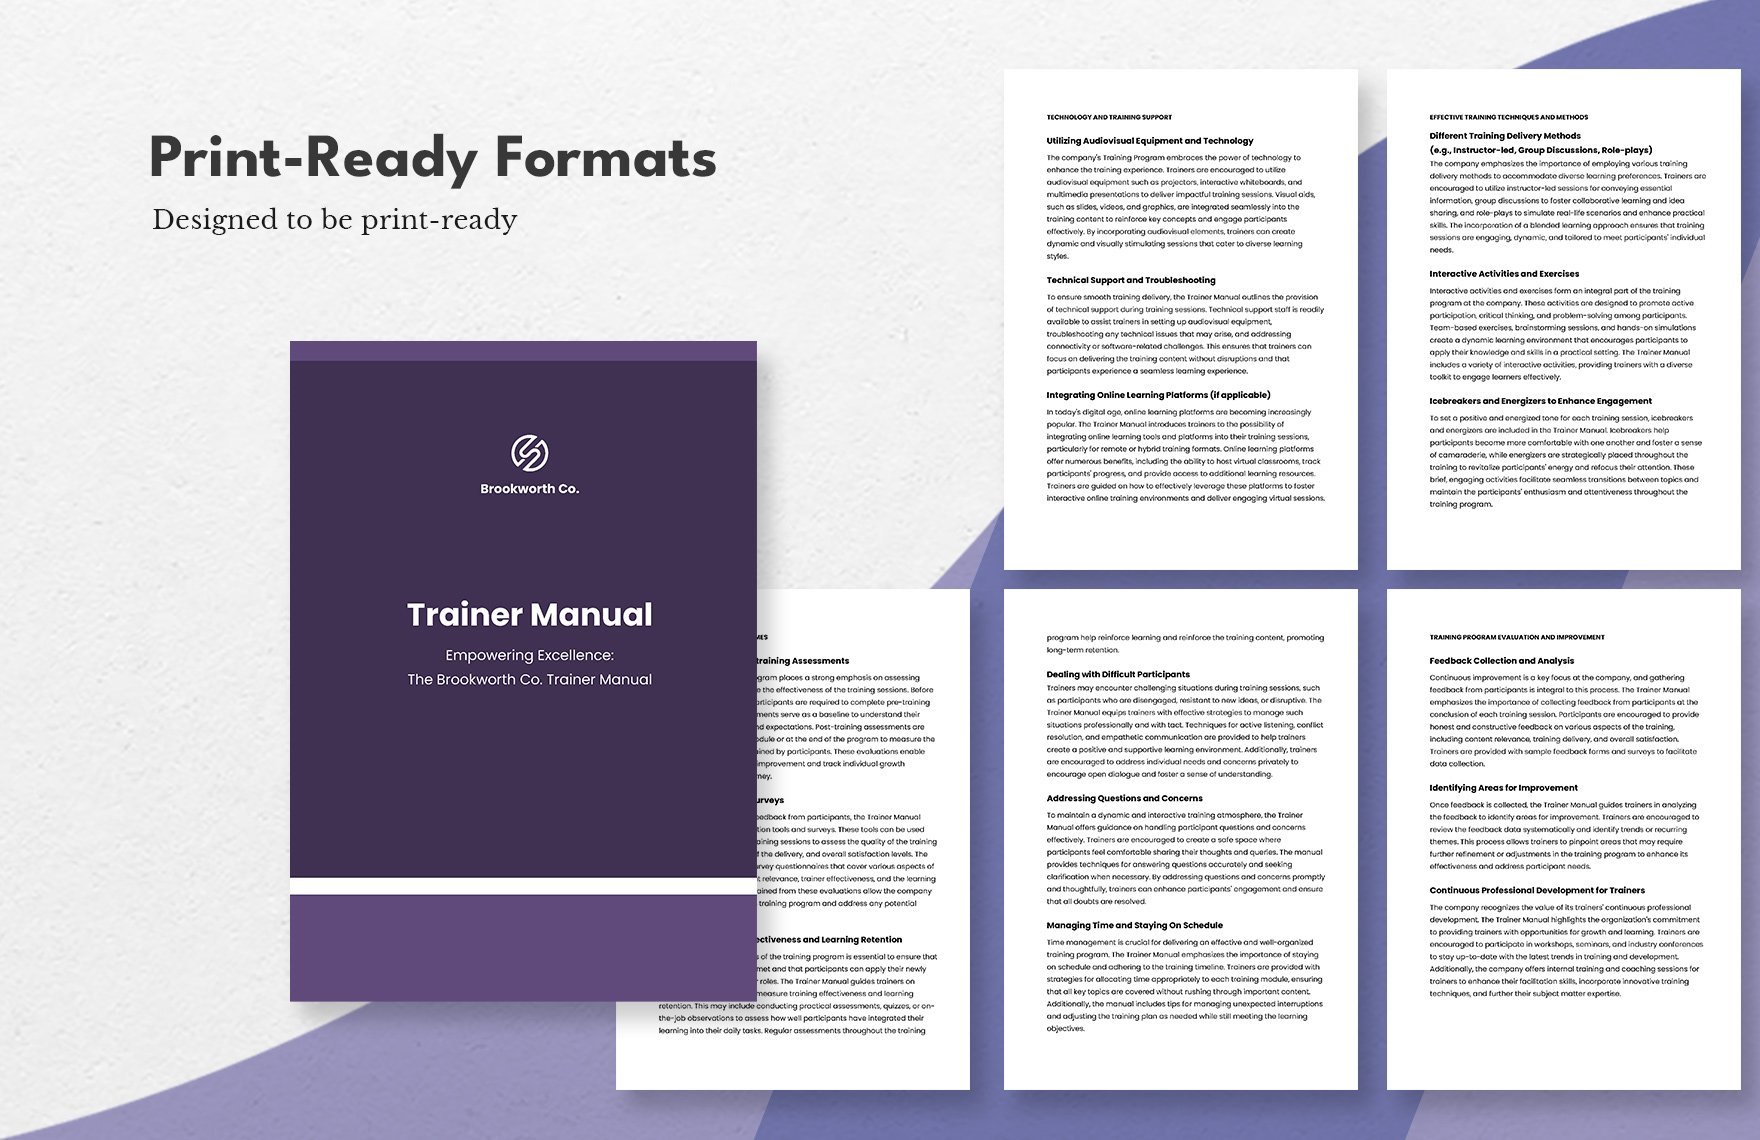 Trainer Manual Template